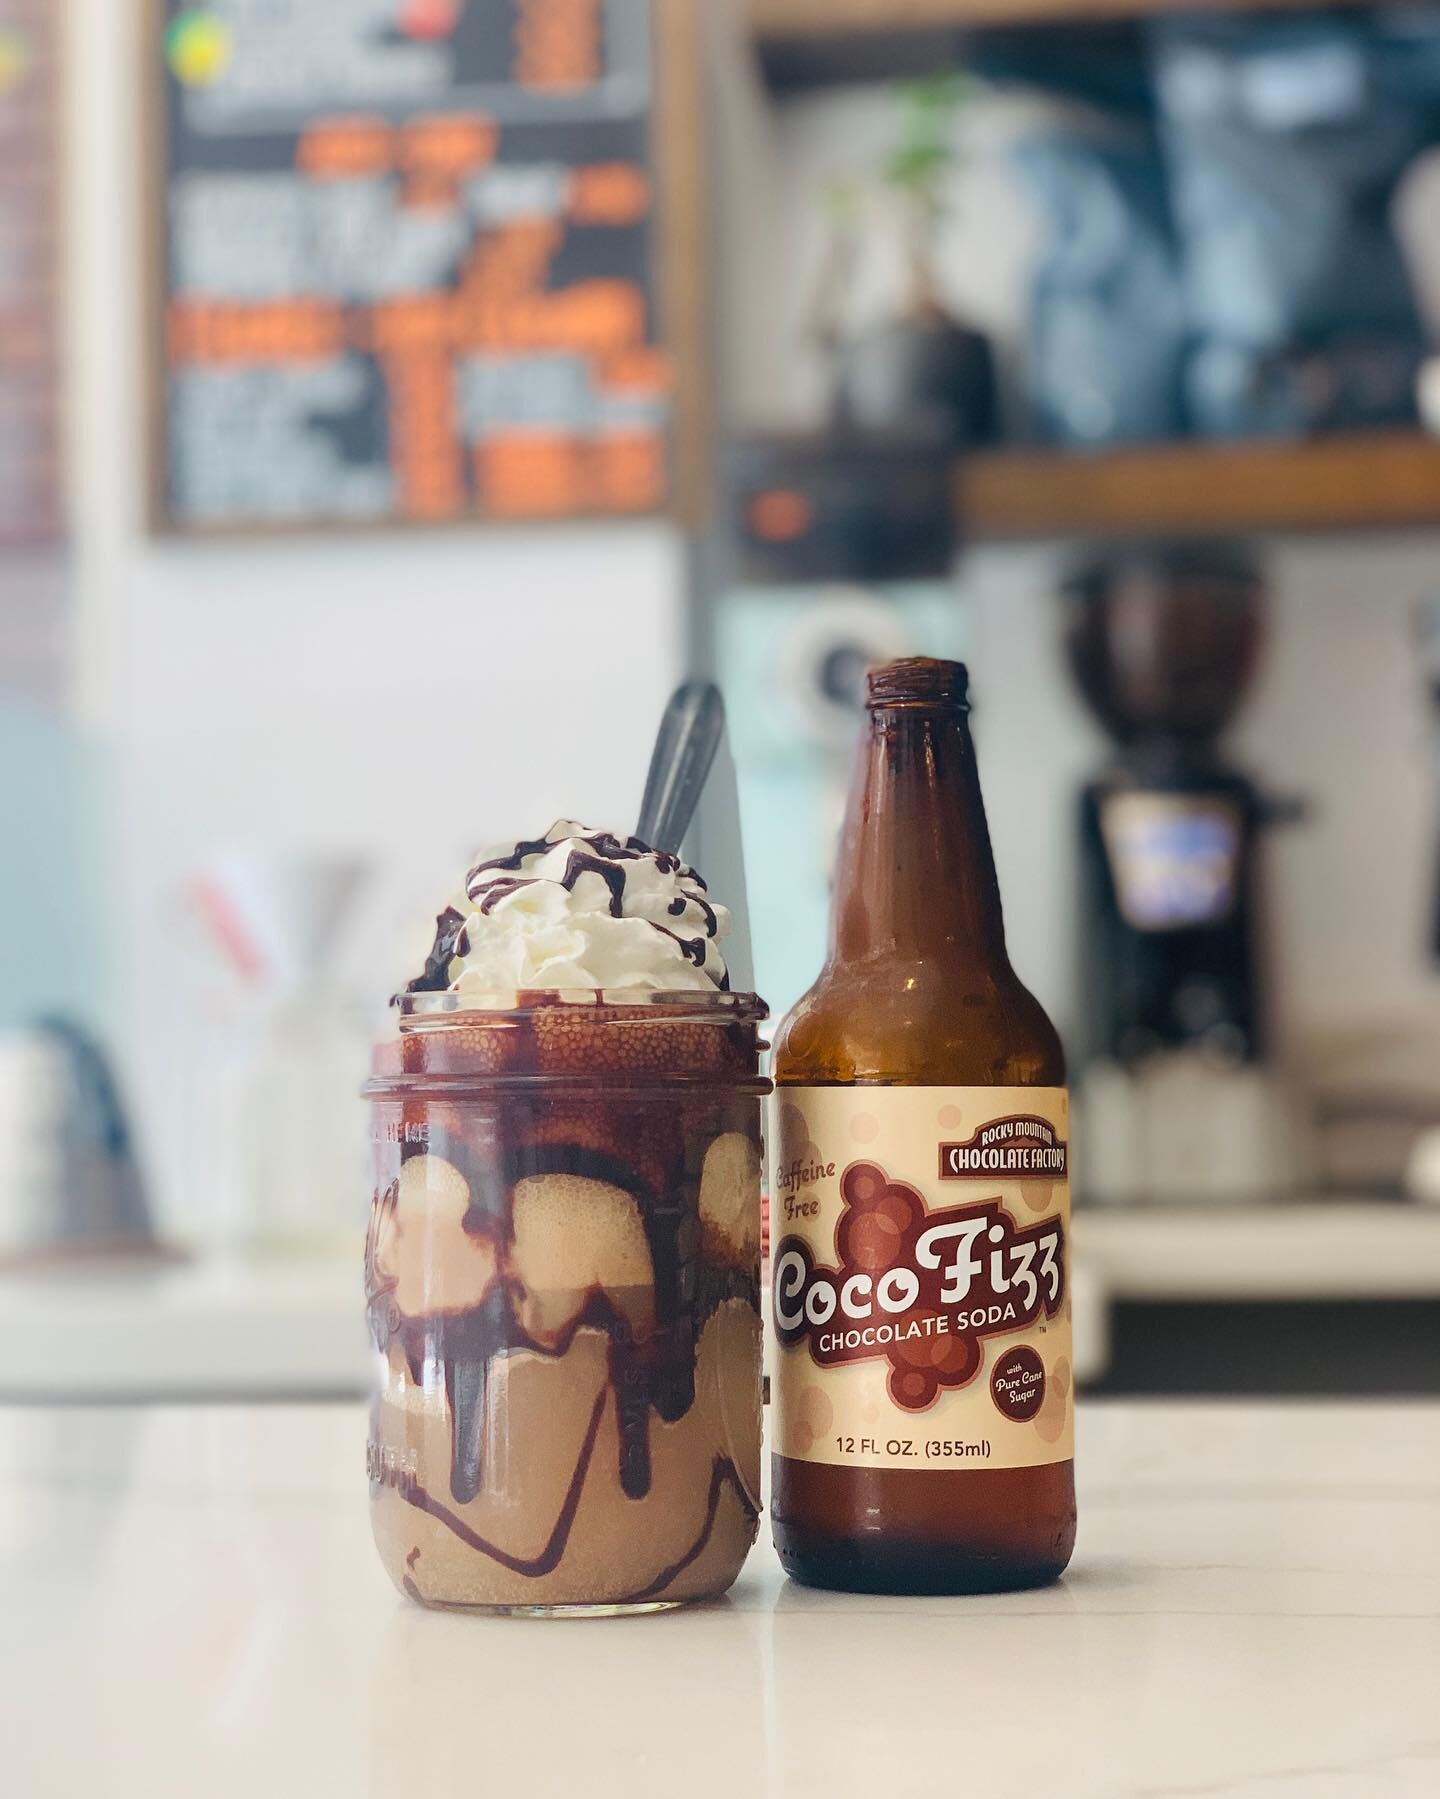 Need to cool down on a hot summer day? Drop by to try this FROZEN MOCHA FLOAT with Chocolate Ice Cream from @fosselmanicecreamco, Chocolate Soda with a Shot of Espresso 🍫 ☕️ 🍨 ⠀
Available at both locations 😋⠀
⠀
⠀
⠀
⠀
#floatcoffeeshop #floatpasaden